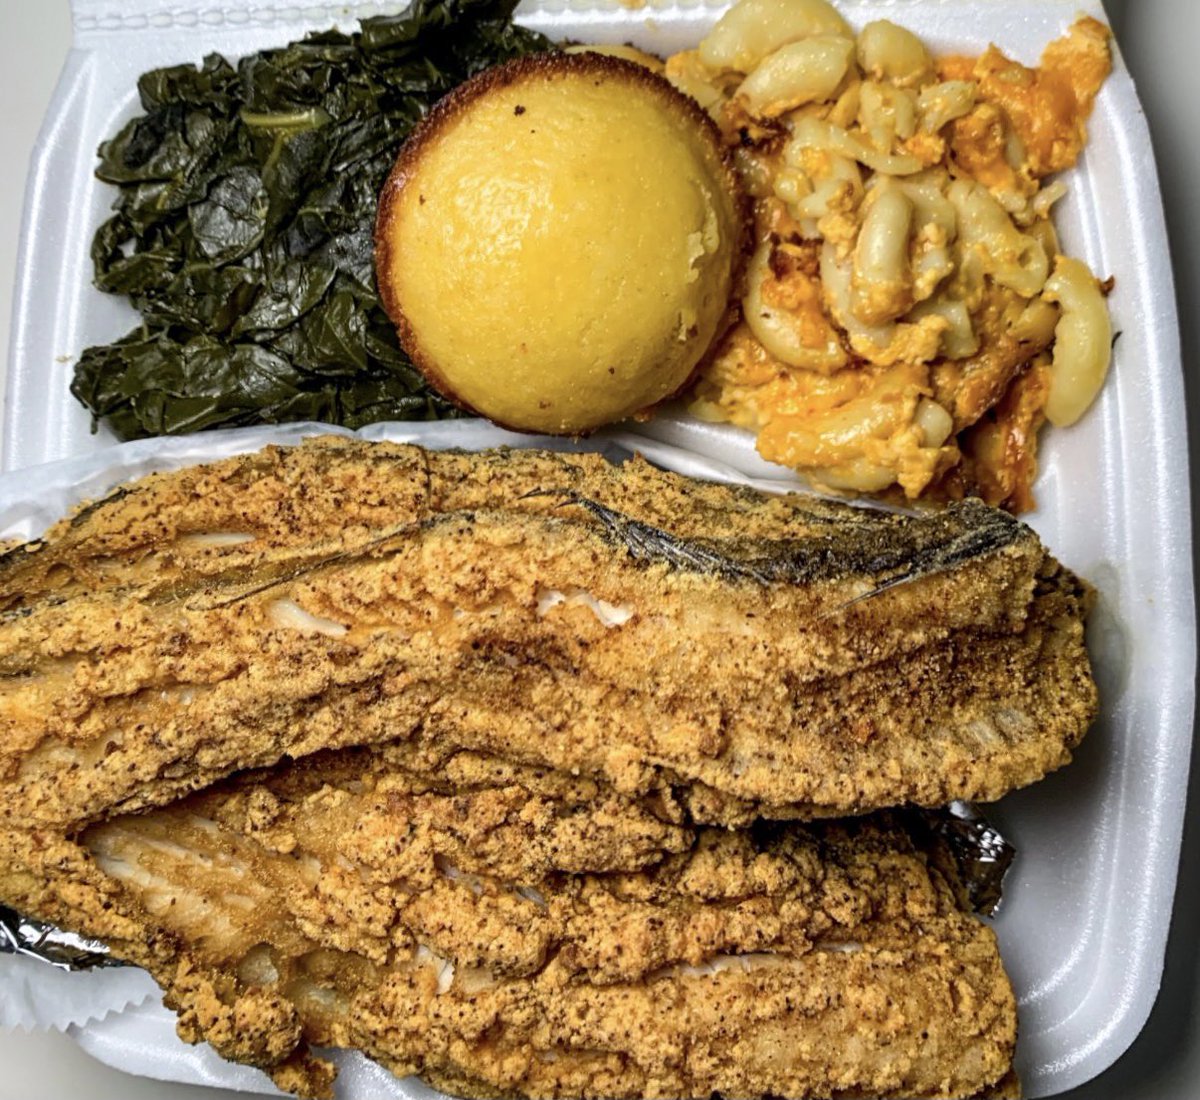 Soul Food in Baltimore:Looking for best or your personal favorite soul food spot in the Baltimore area! What’s your order?Please tell us if the sides you’ve tried are also good so we can all run to that restaurant. 